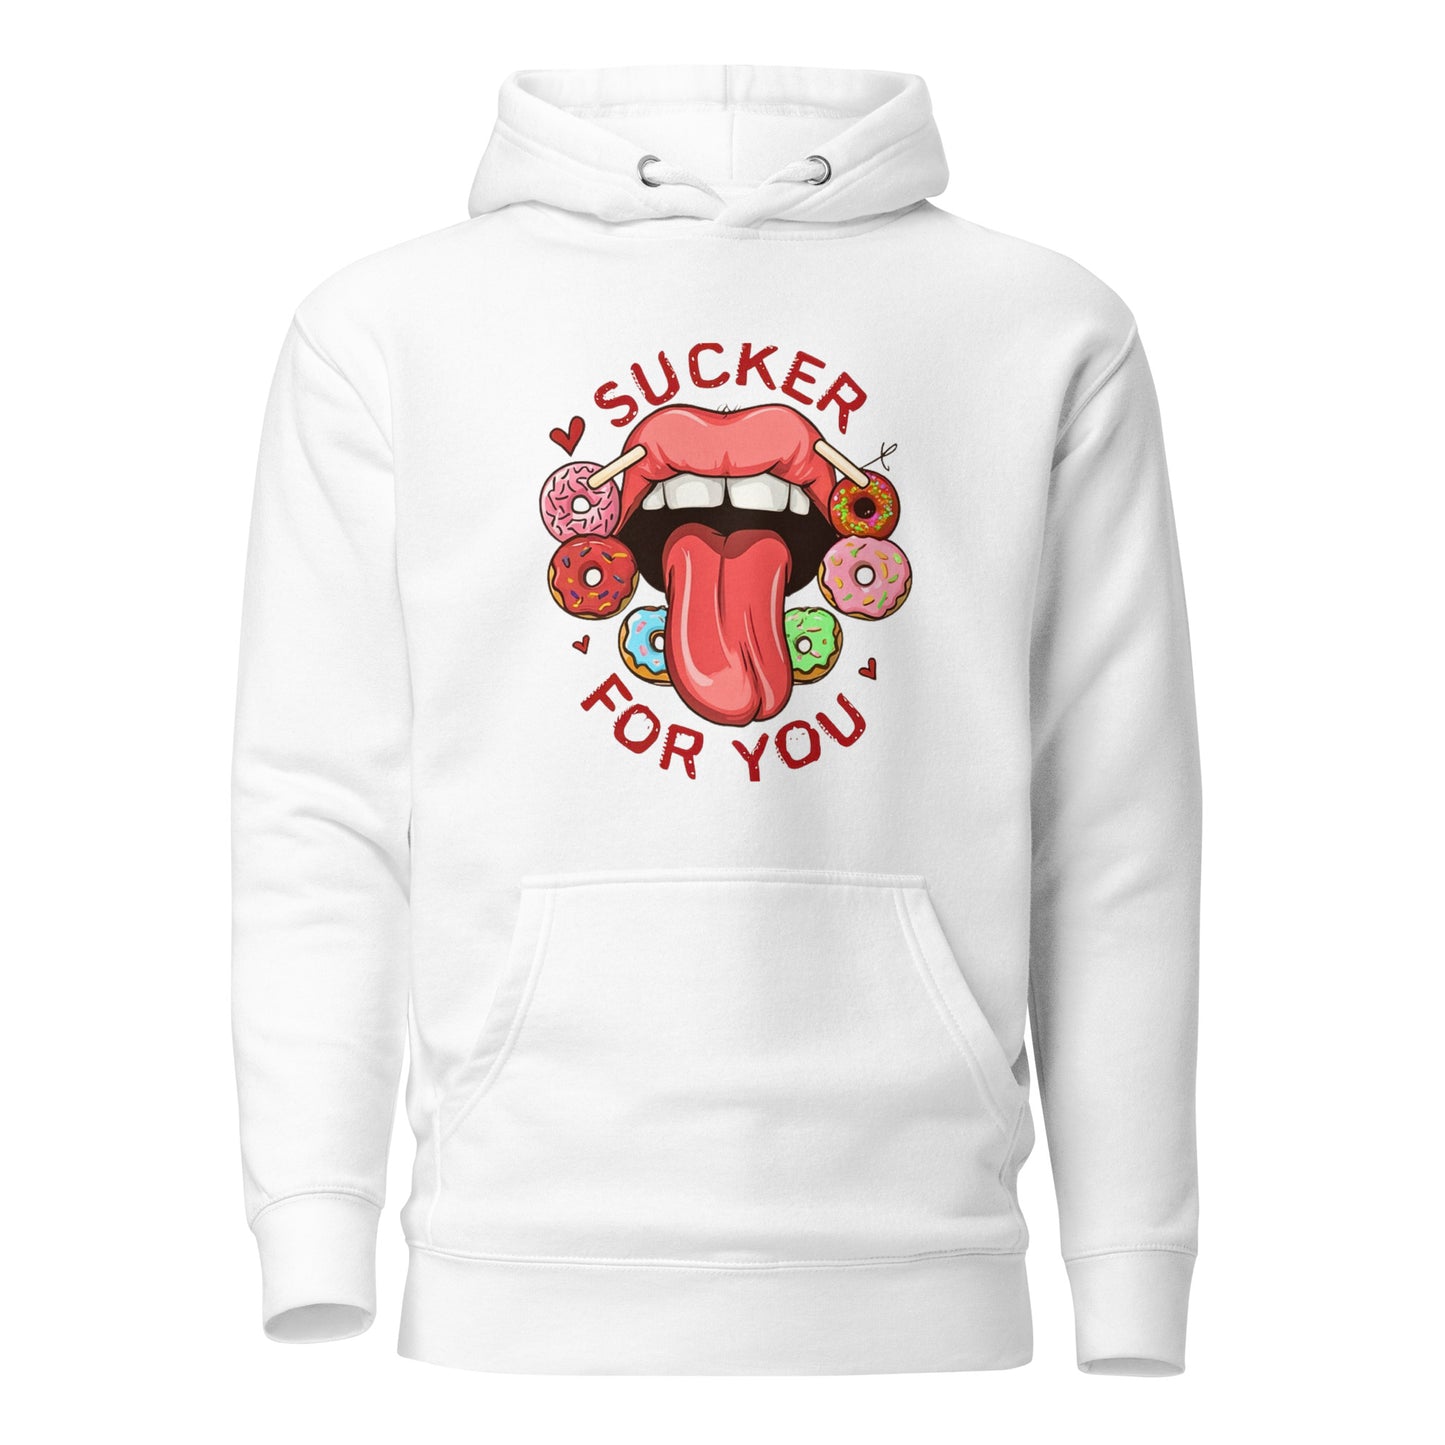 Sucker For You Hoodie, Sucker For You Crewneck "Sucker For You" Hoodie! 💖 🍭💑 love, hoodie, unisex hodies, knqv style